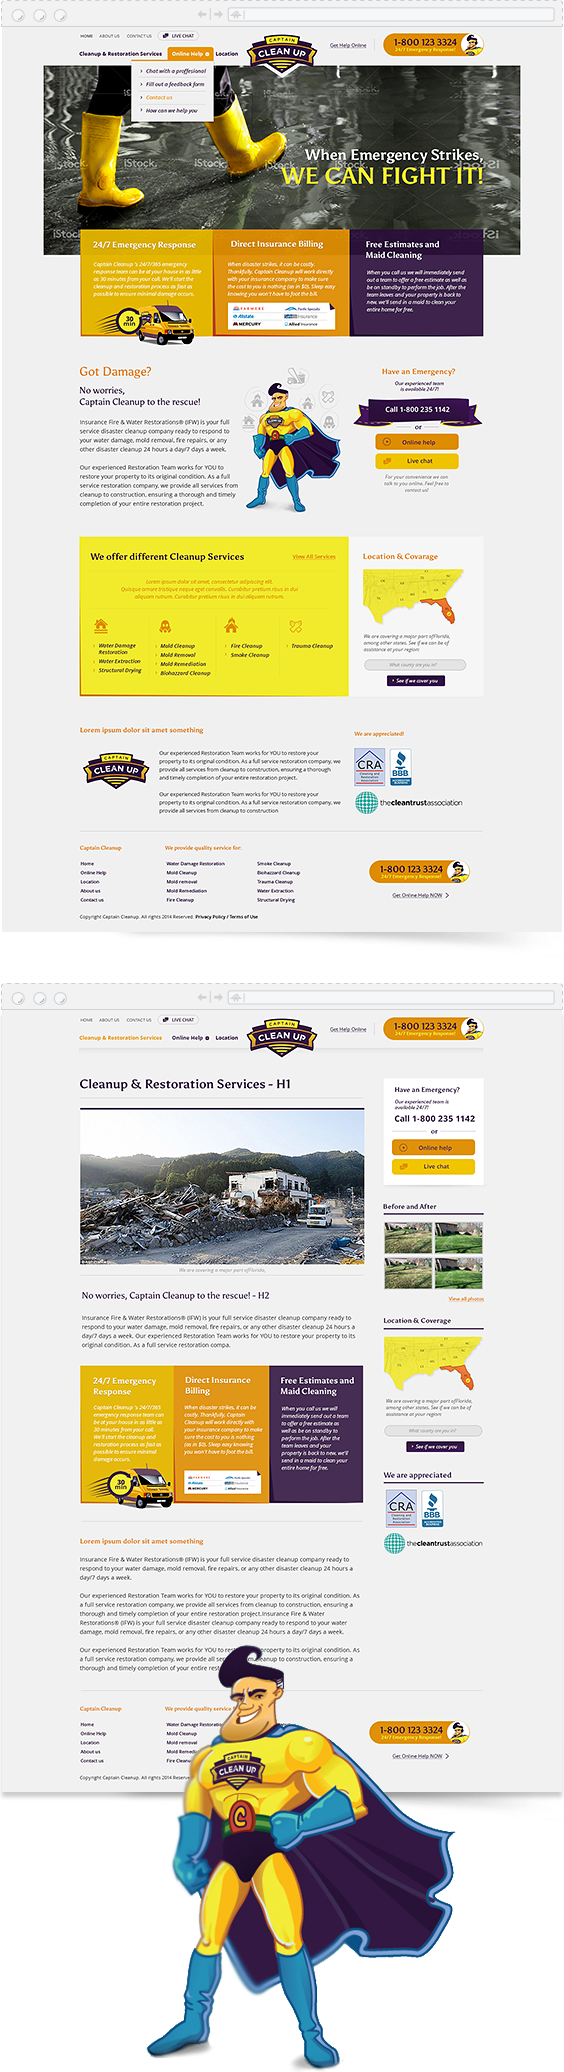 Web Layout business addiction wedding Cleanup cleaning service financing loans Startup